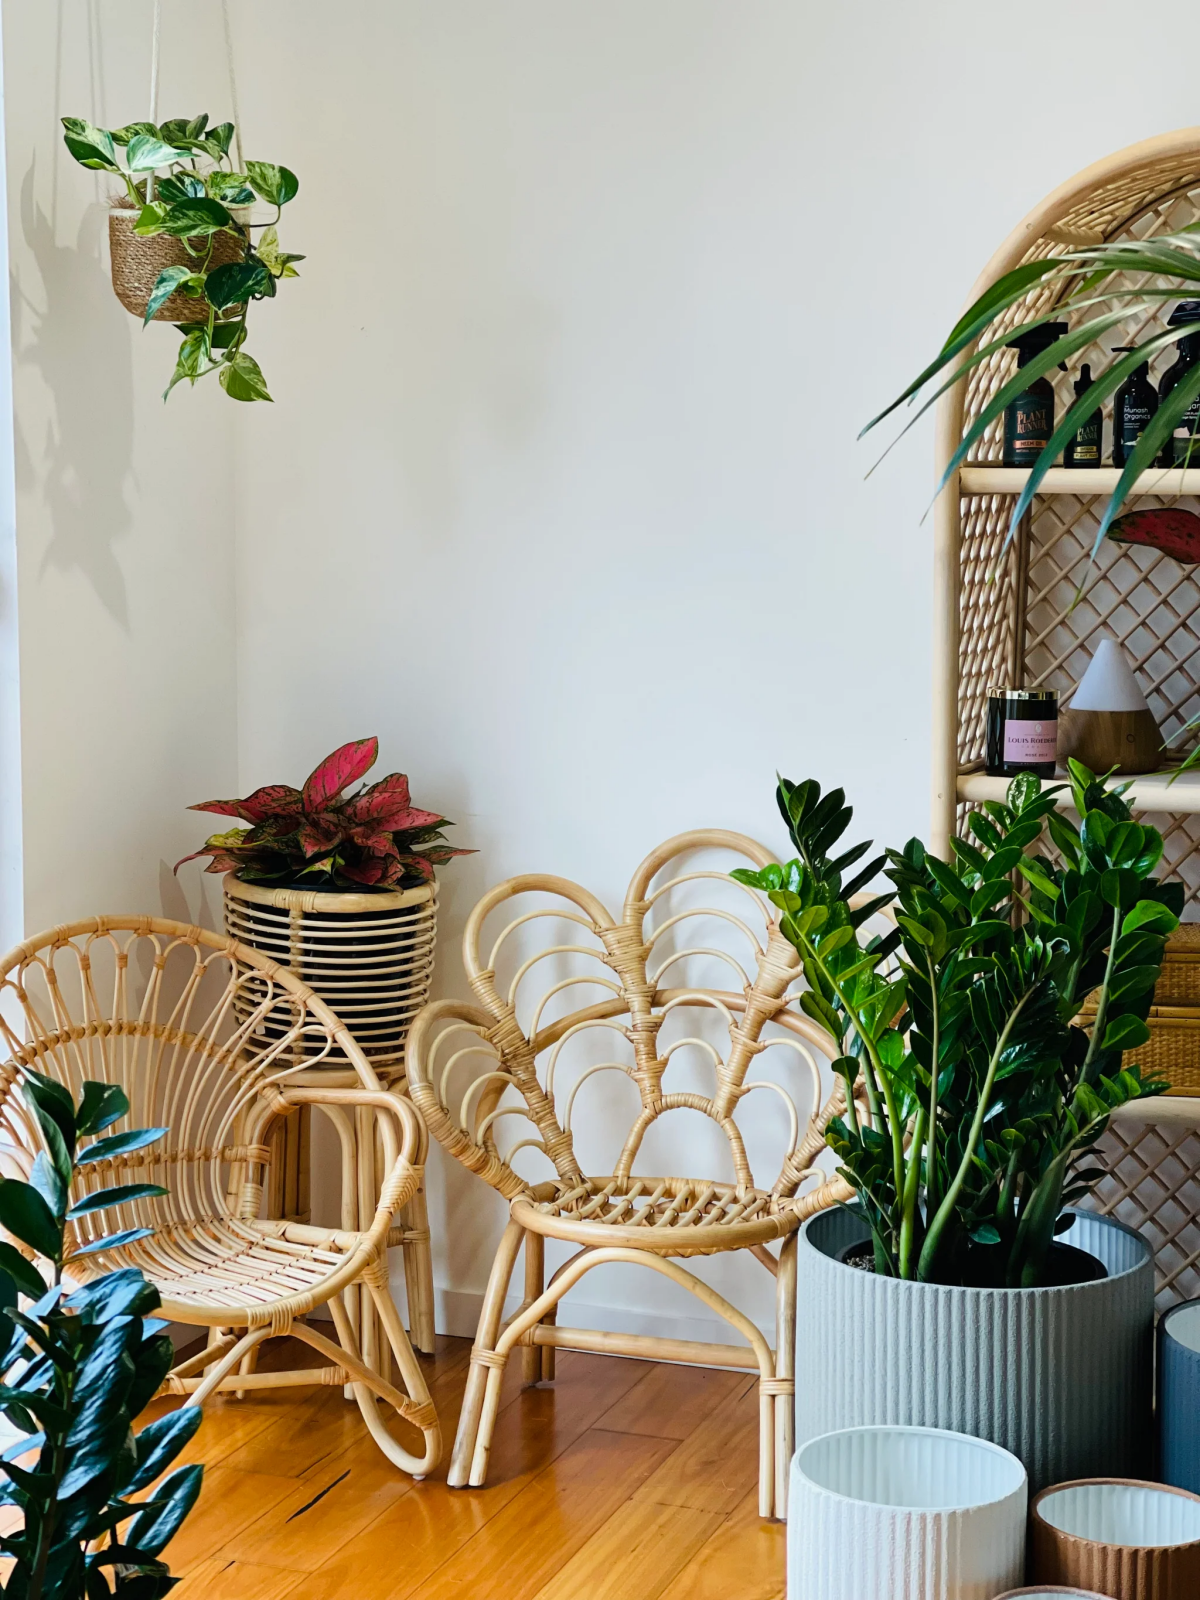 where to place plants in living room feng shui.jpg